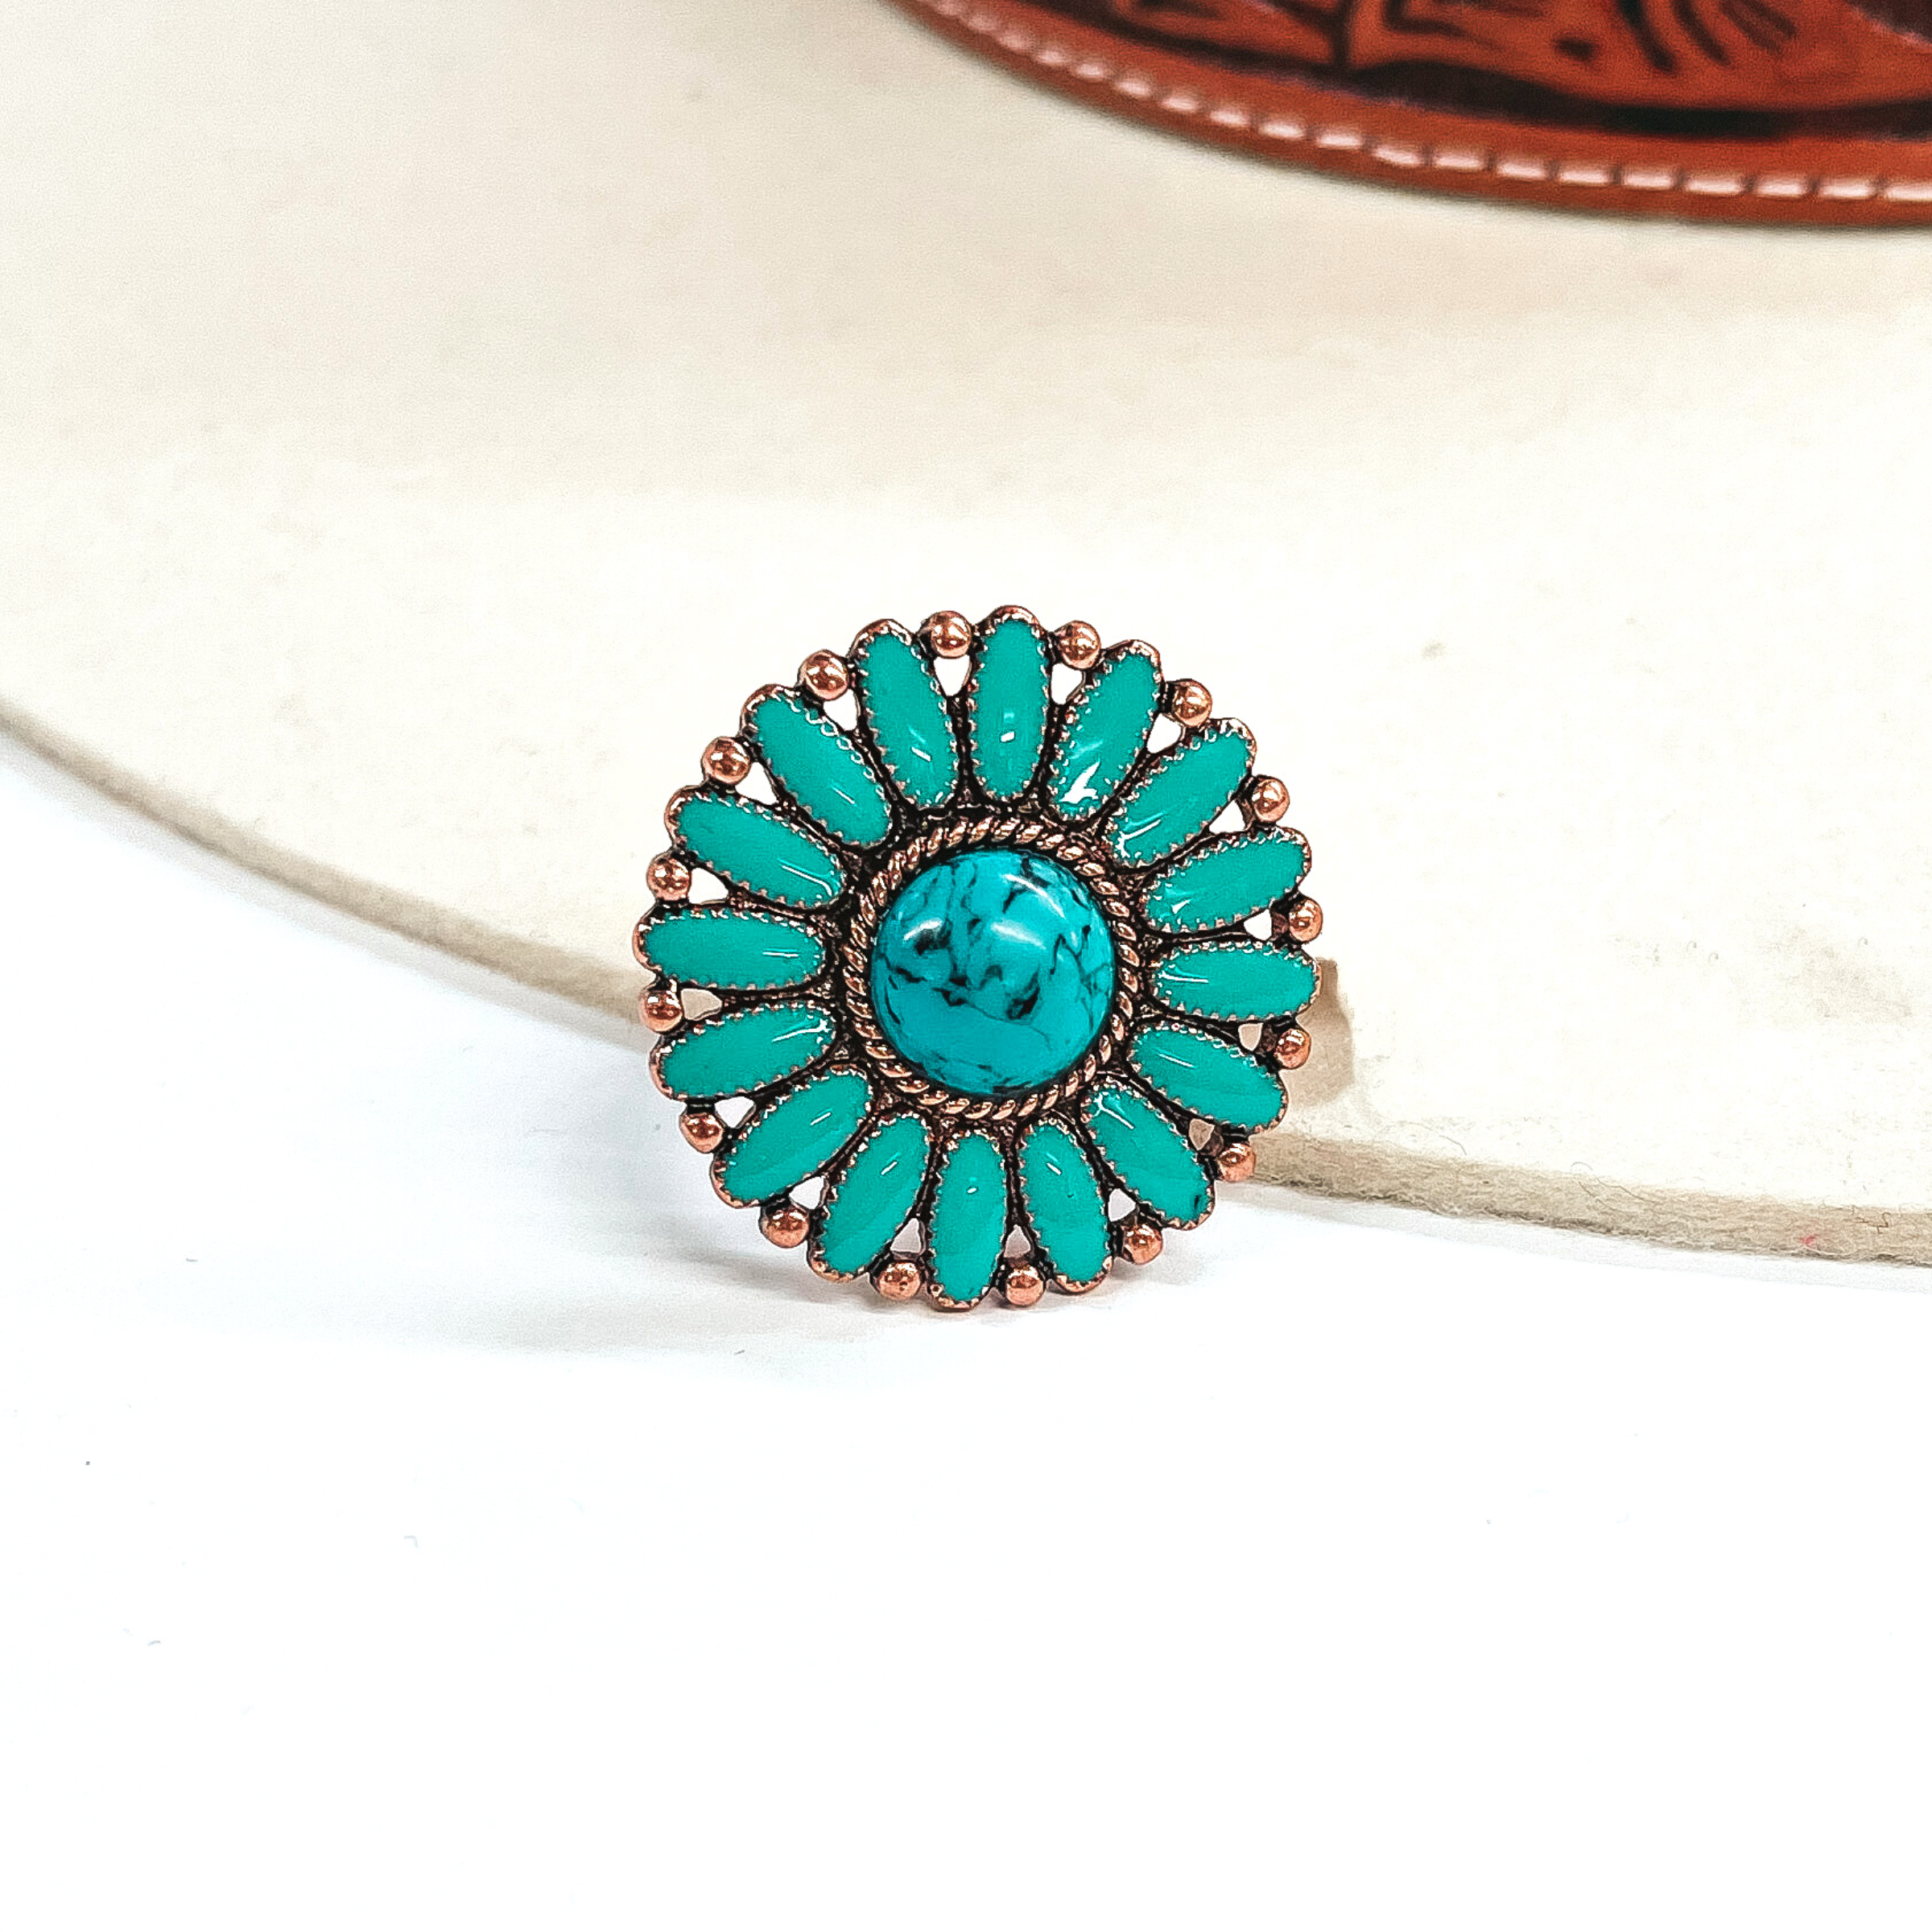 This is a turquoise,circle concho, epoxy cluster ring in a copper setting.  The ring has a small circle stone in the center with a copper, rope textured outline,  with oval shaped stone all around like a flower. In between each 'petal' it has copper  circles all around. This ring is taken on an ivory felt hat  with a brown textured band and on a white background.